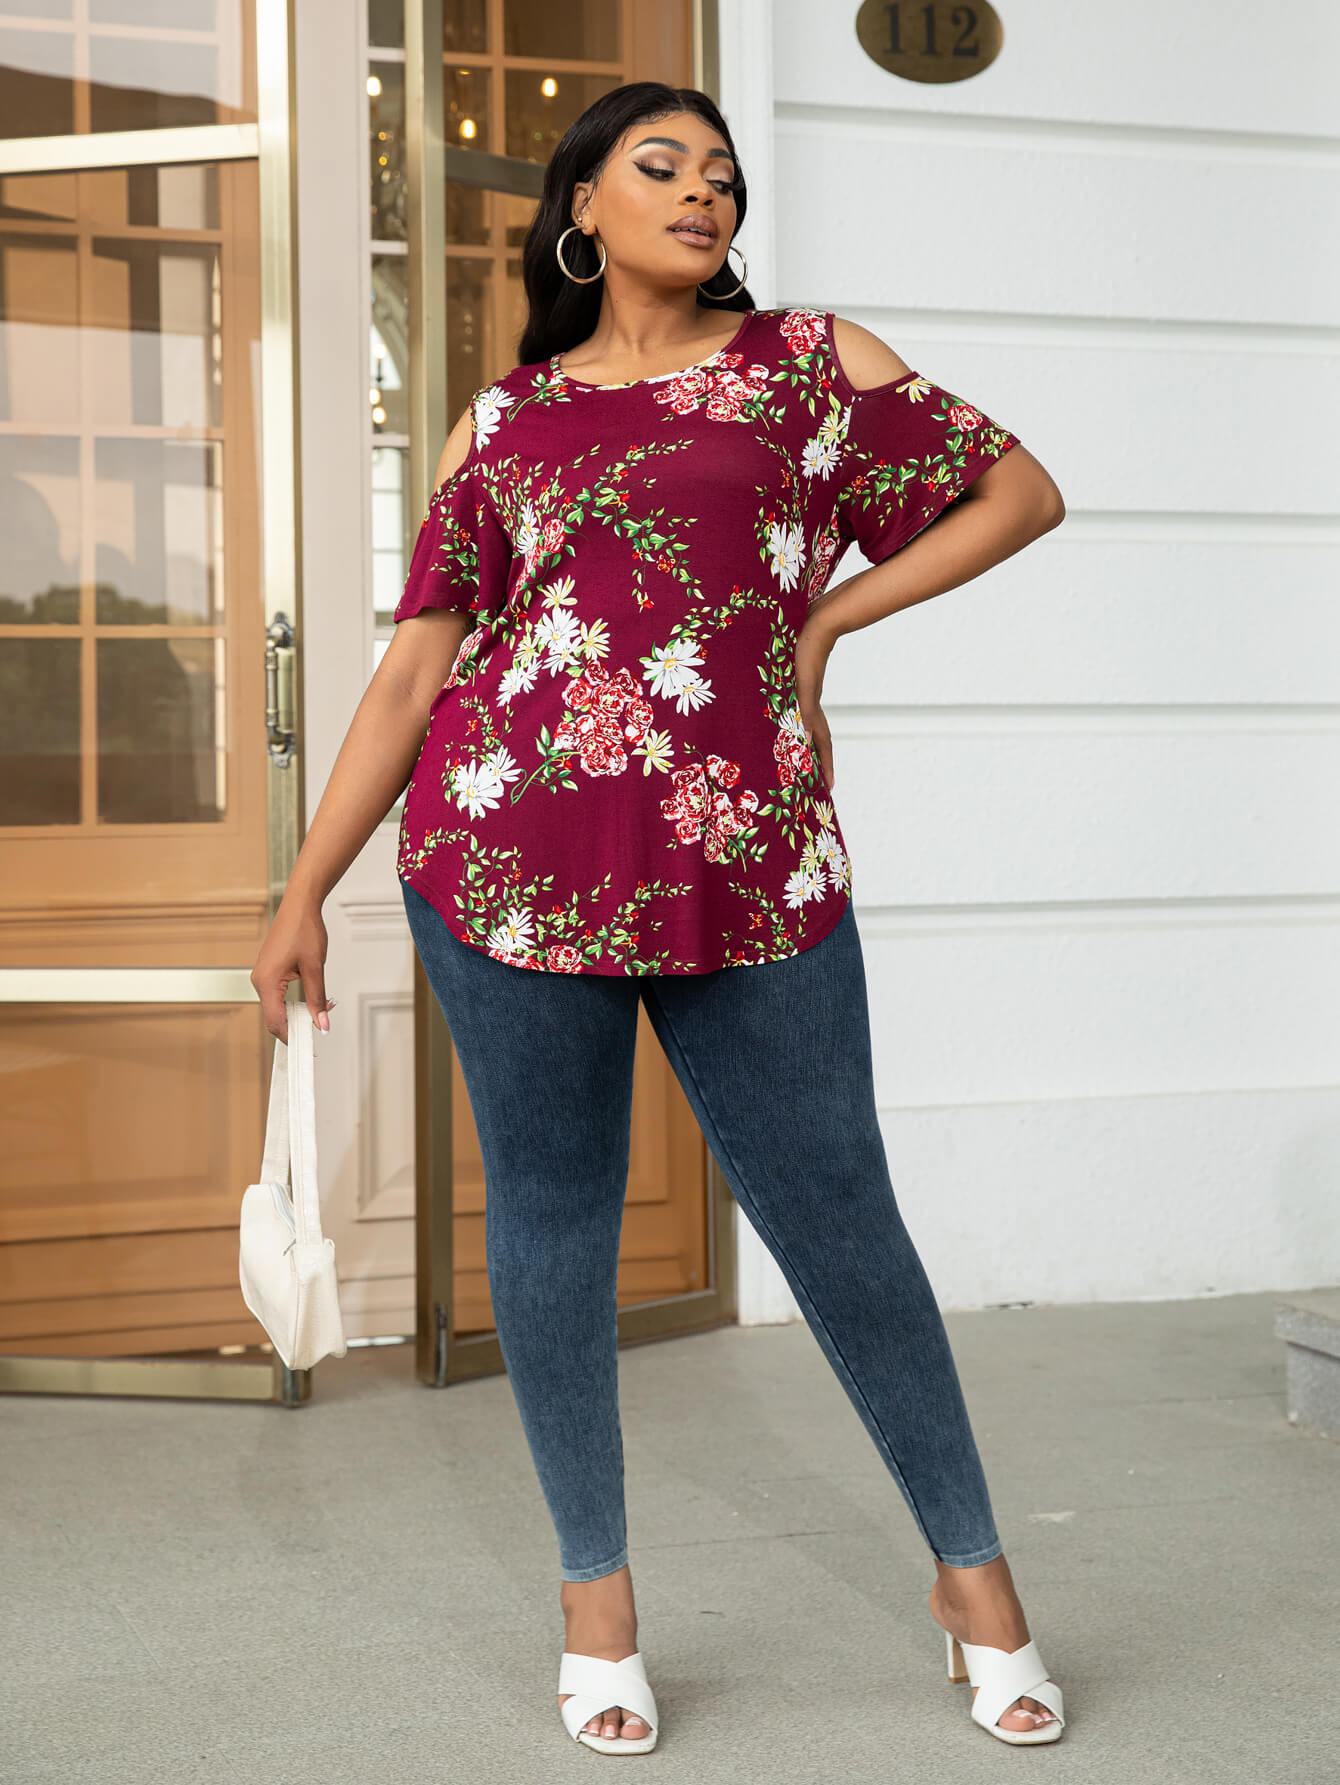 Plus Size Cold-Shoulder Round Neck Curved Hem Tee COCO CRESS